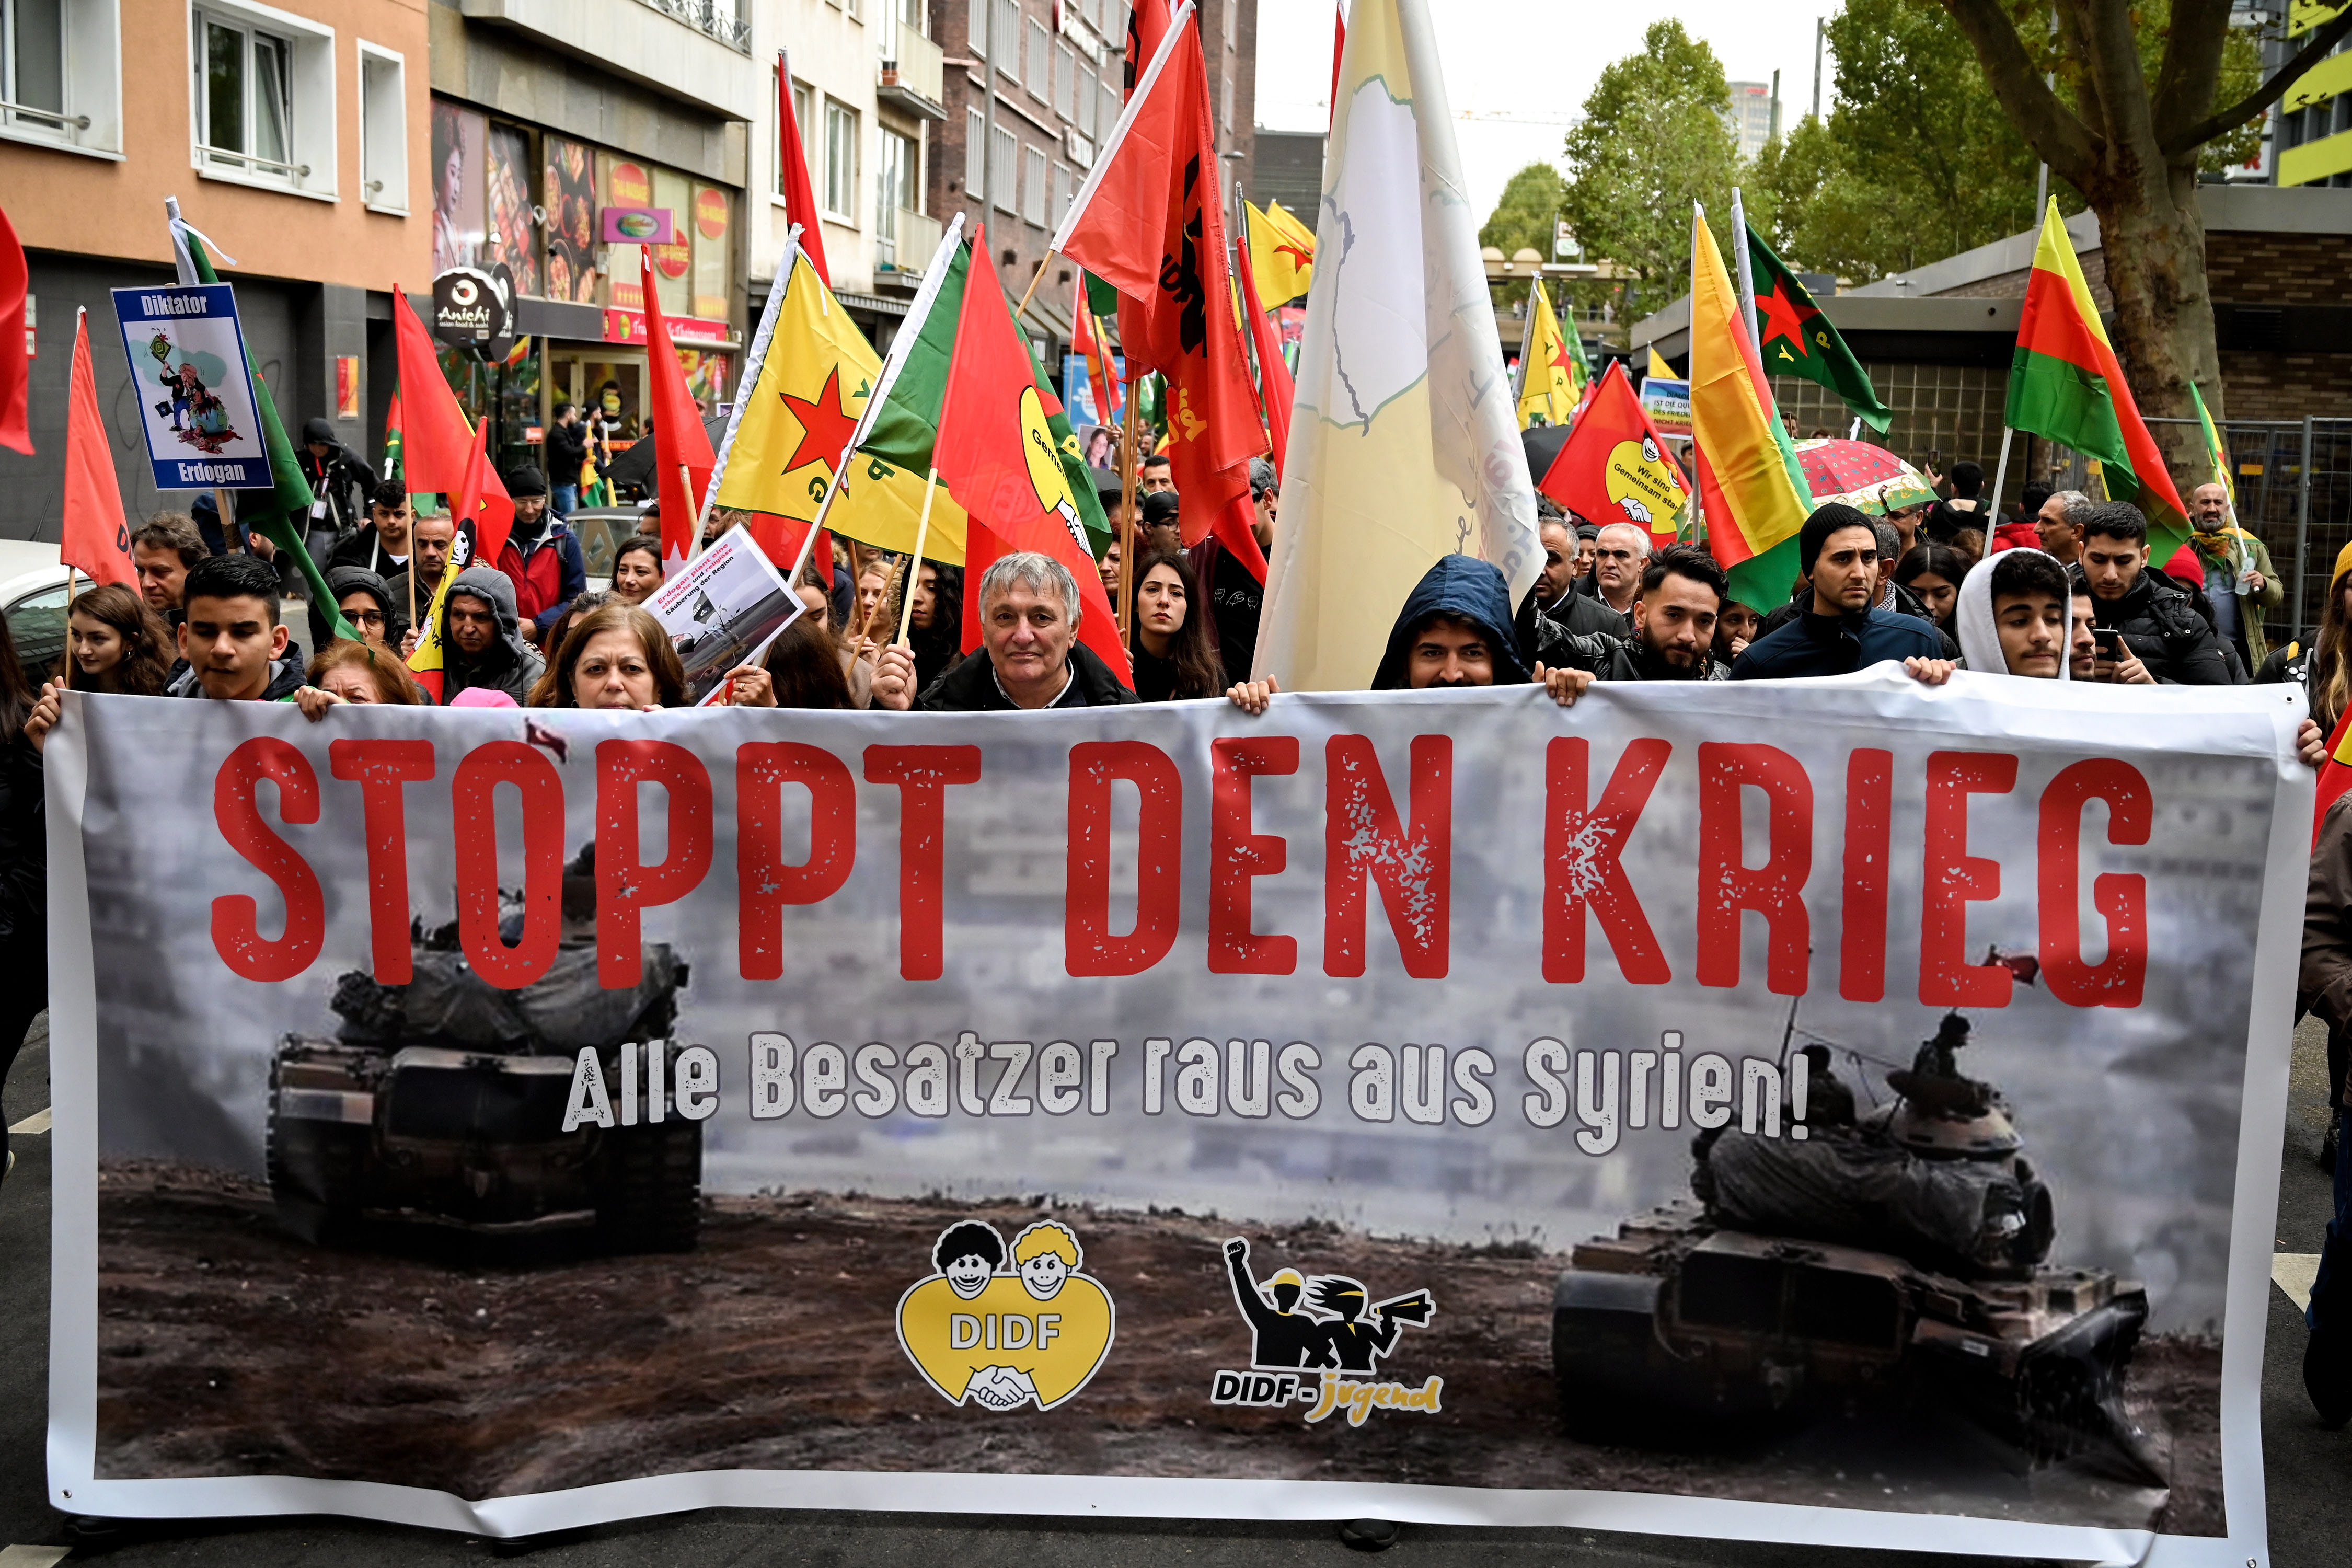 epa07933241 Kurdish activists wave flags and show banners as they protest against the ongoing Turkish military operation in the Syrian border region and the Kurdish territories, in Cologne, Germany, 19 October 2019. The protesters demanded economic sanctions and an arms embargo against Ankara as well as a termination of the EU-Turkey refugee agreement.  EPA/SASCHA STEINBACH